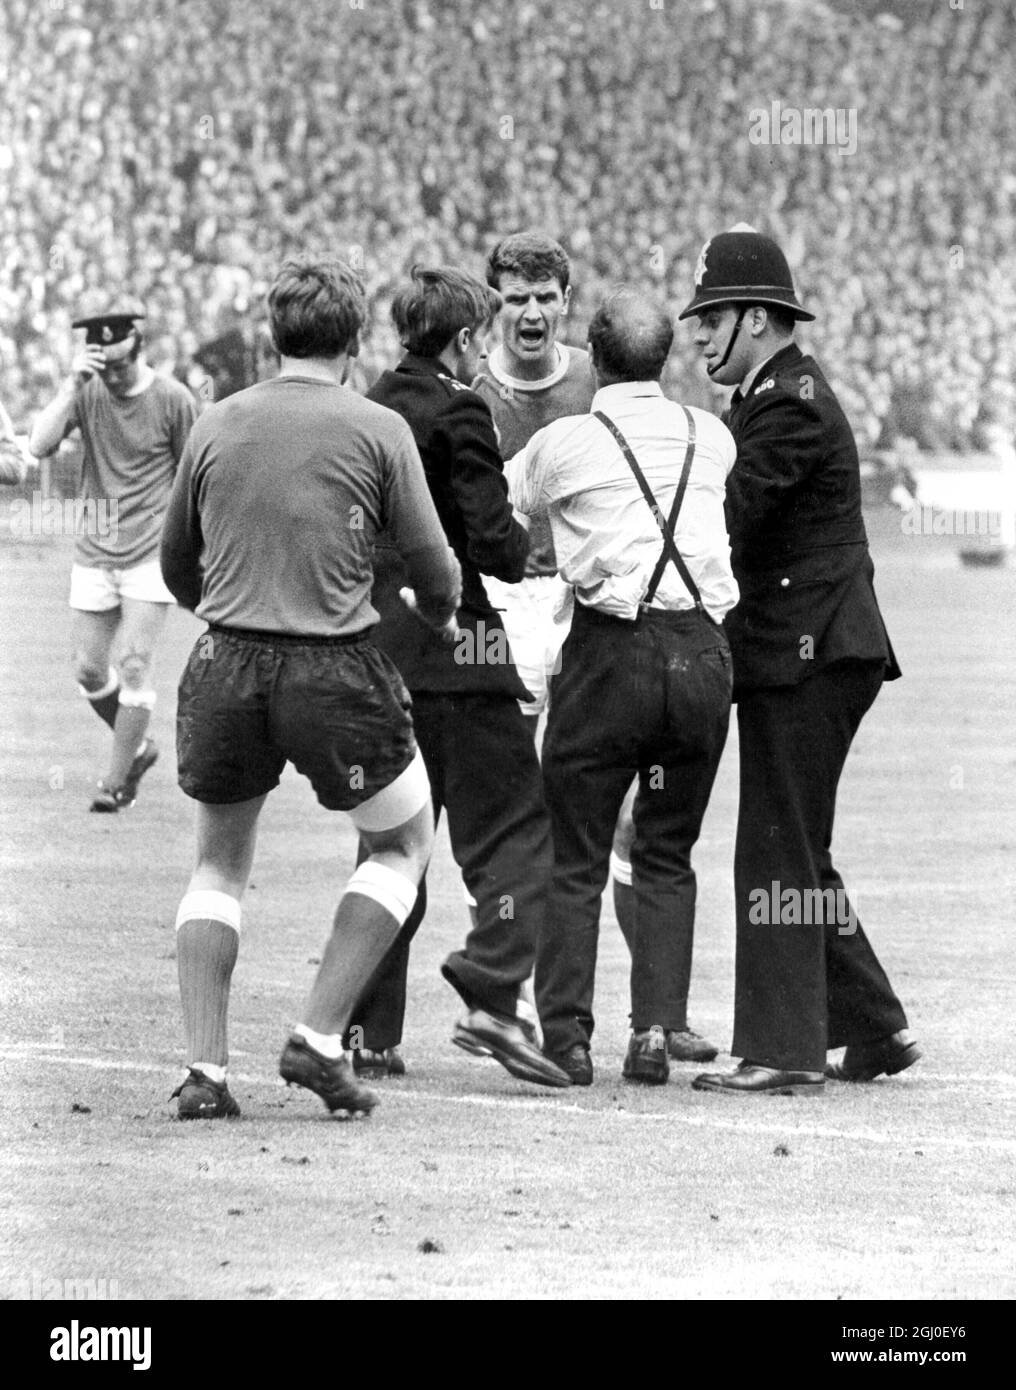 1966 FA Cup Final Everton v Sheffield Wednesday Just another one of those madly enthusiastic moments during the FA Cup Final at Wembley, London, as a supporter who is too keenly enthusiastic rushed on the field after the hero of the match Mike Trebilcock had scored Everton's second goal. As police remove the supporter Everton captain Brian Labone remonstrates with him (Labone facing camera). On left, with back to camera is Gordon West, and extreme left, trying on the police officer's hat for size, is Brian Harris. 14th May 1966 Stock Photo